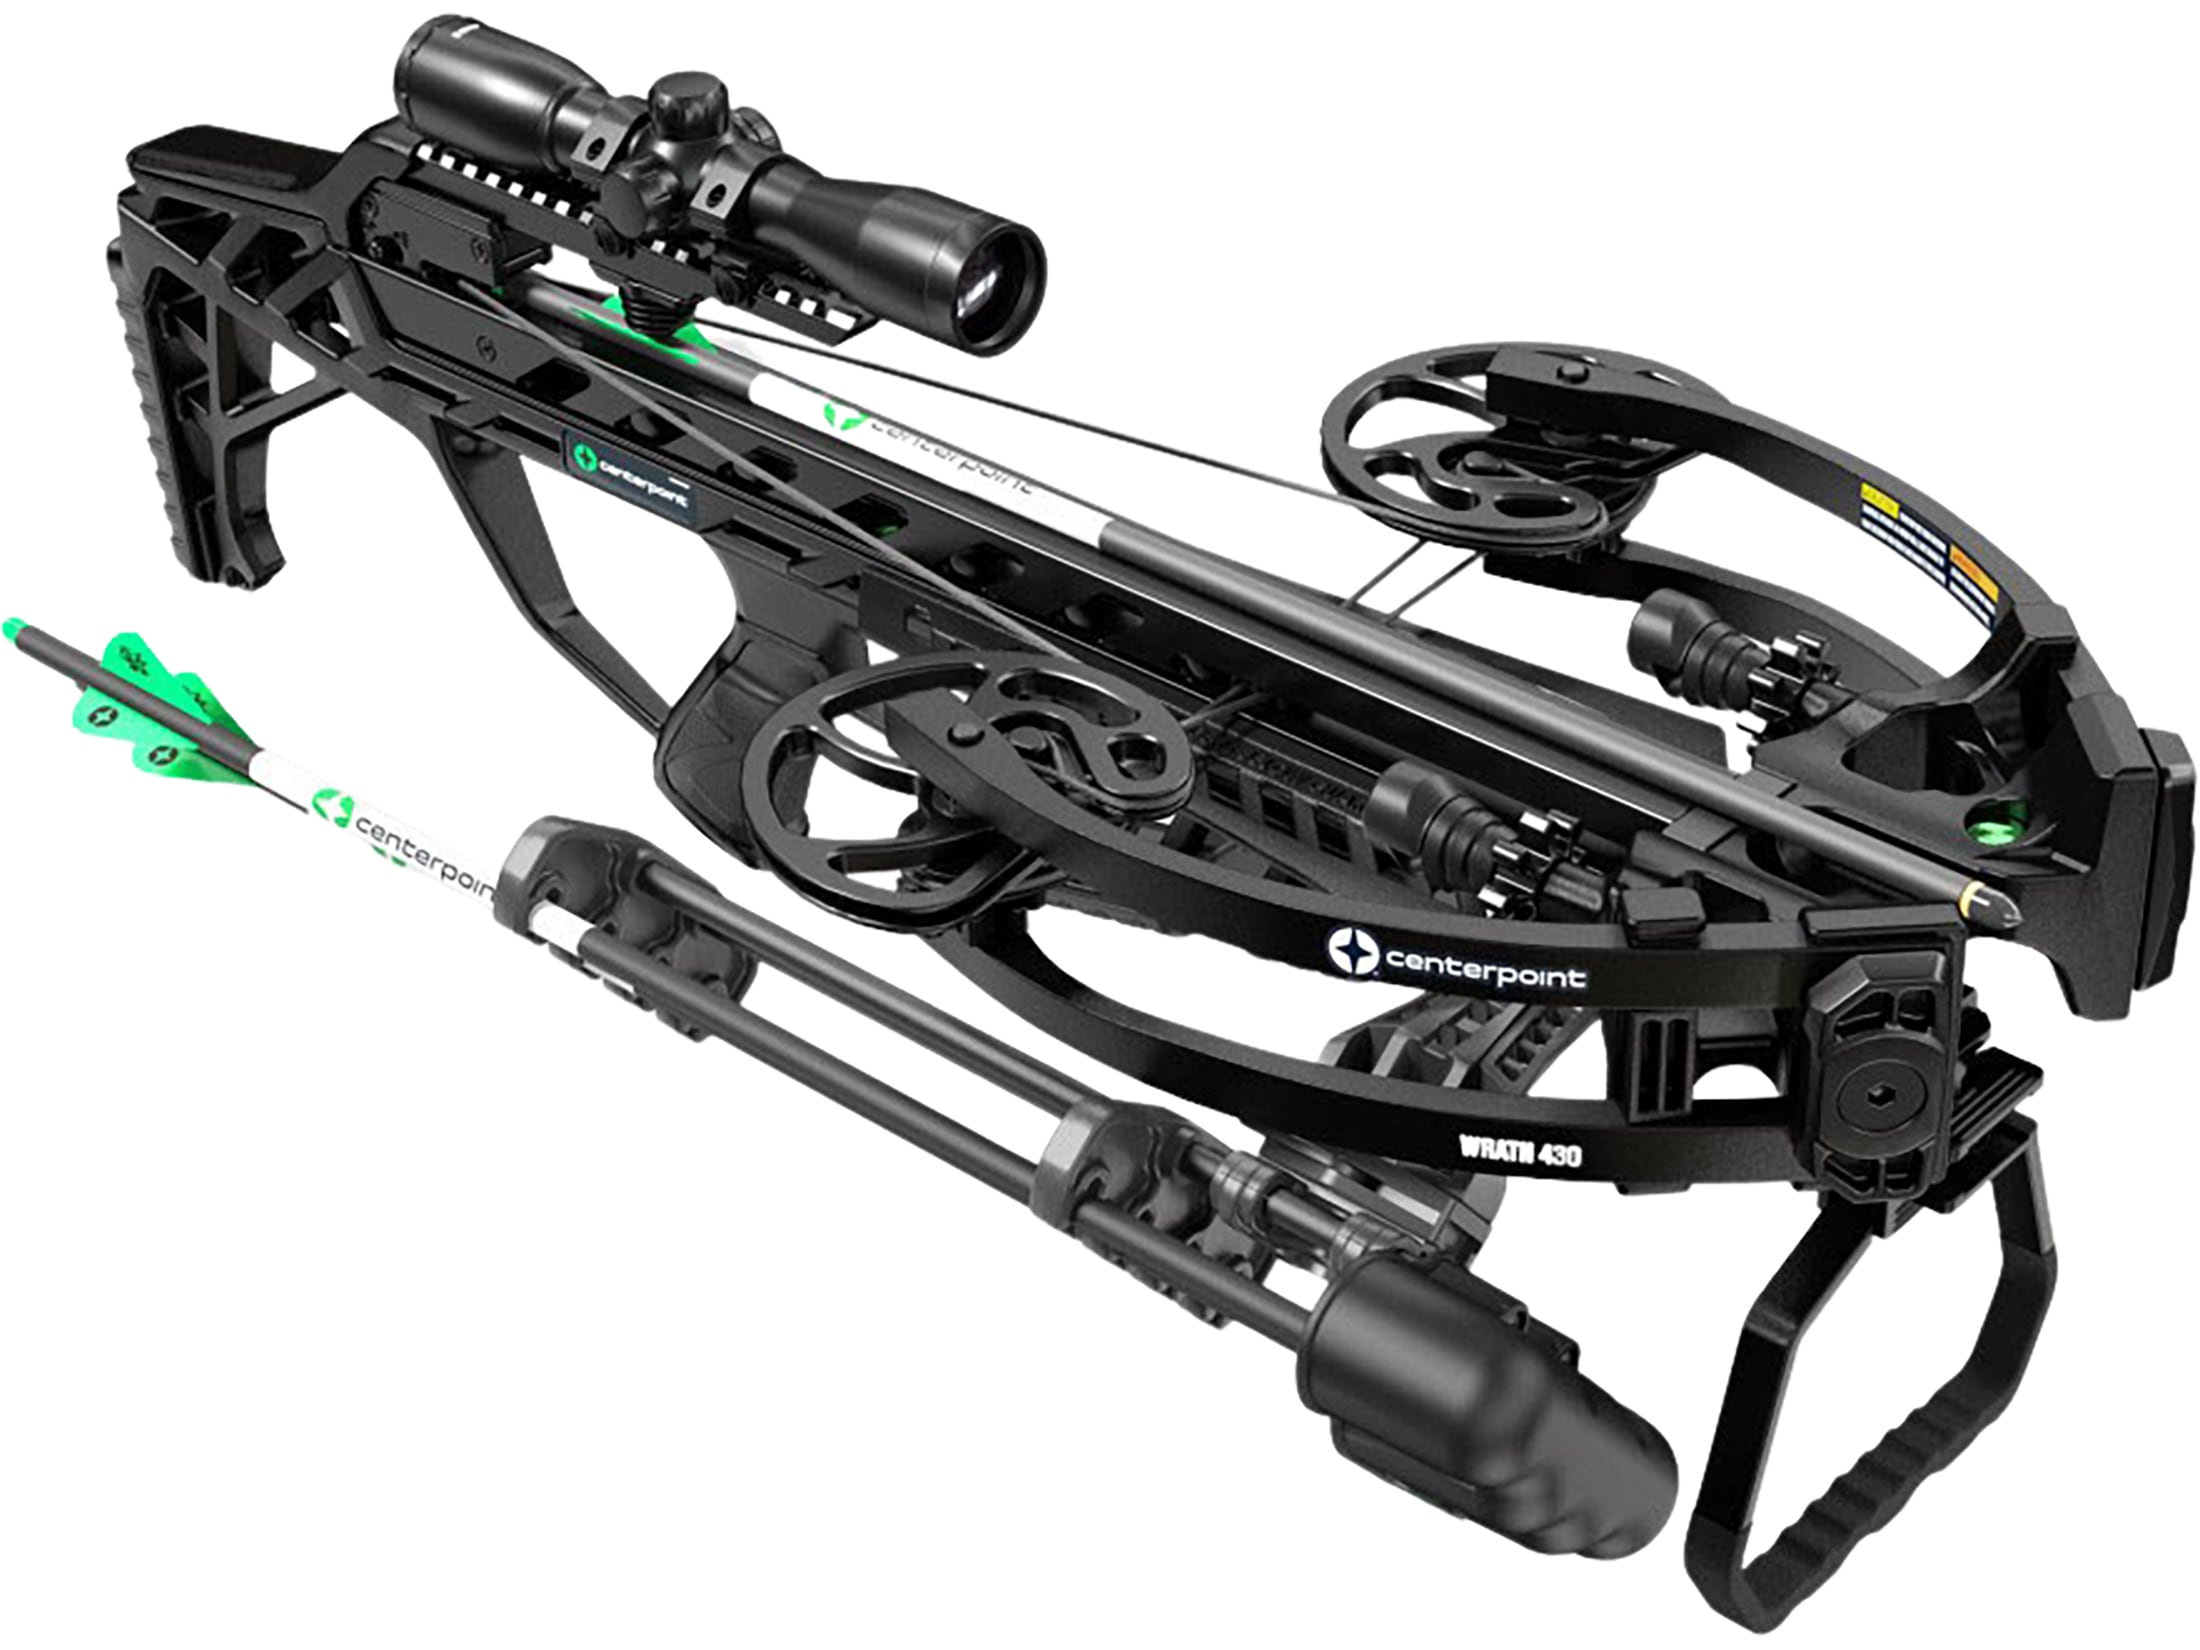 CenterPoint Wrath 430 Crossbow Package Silent Crank